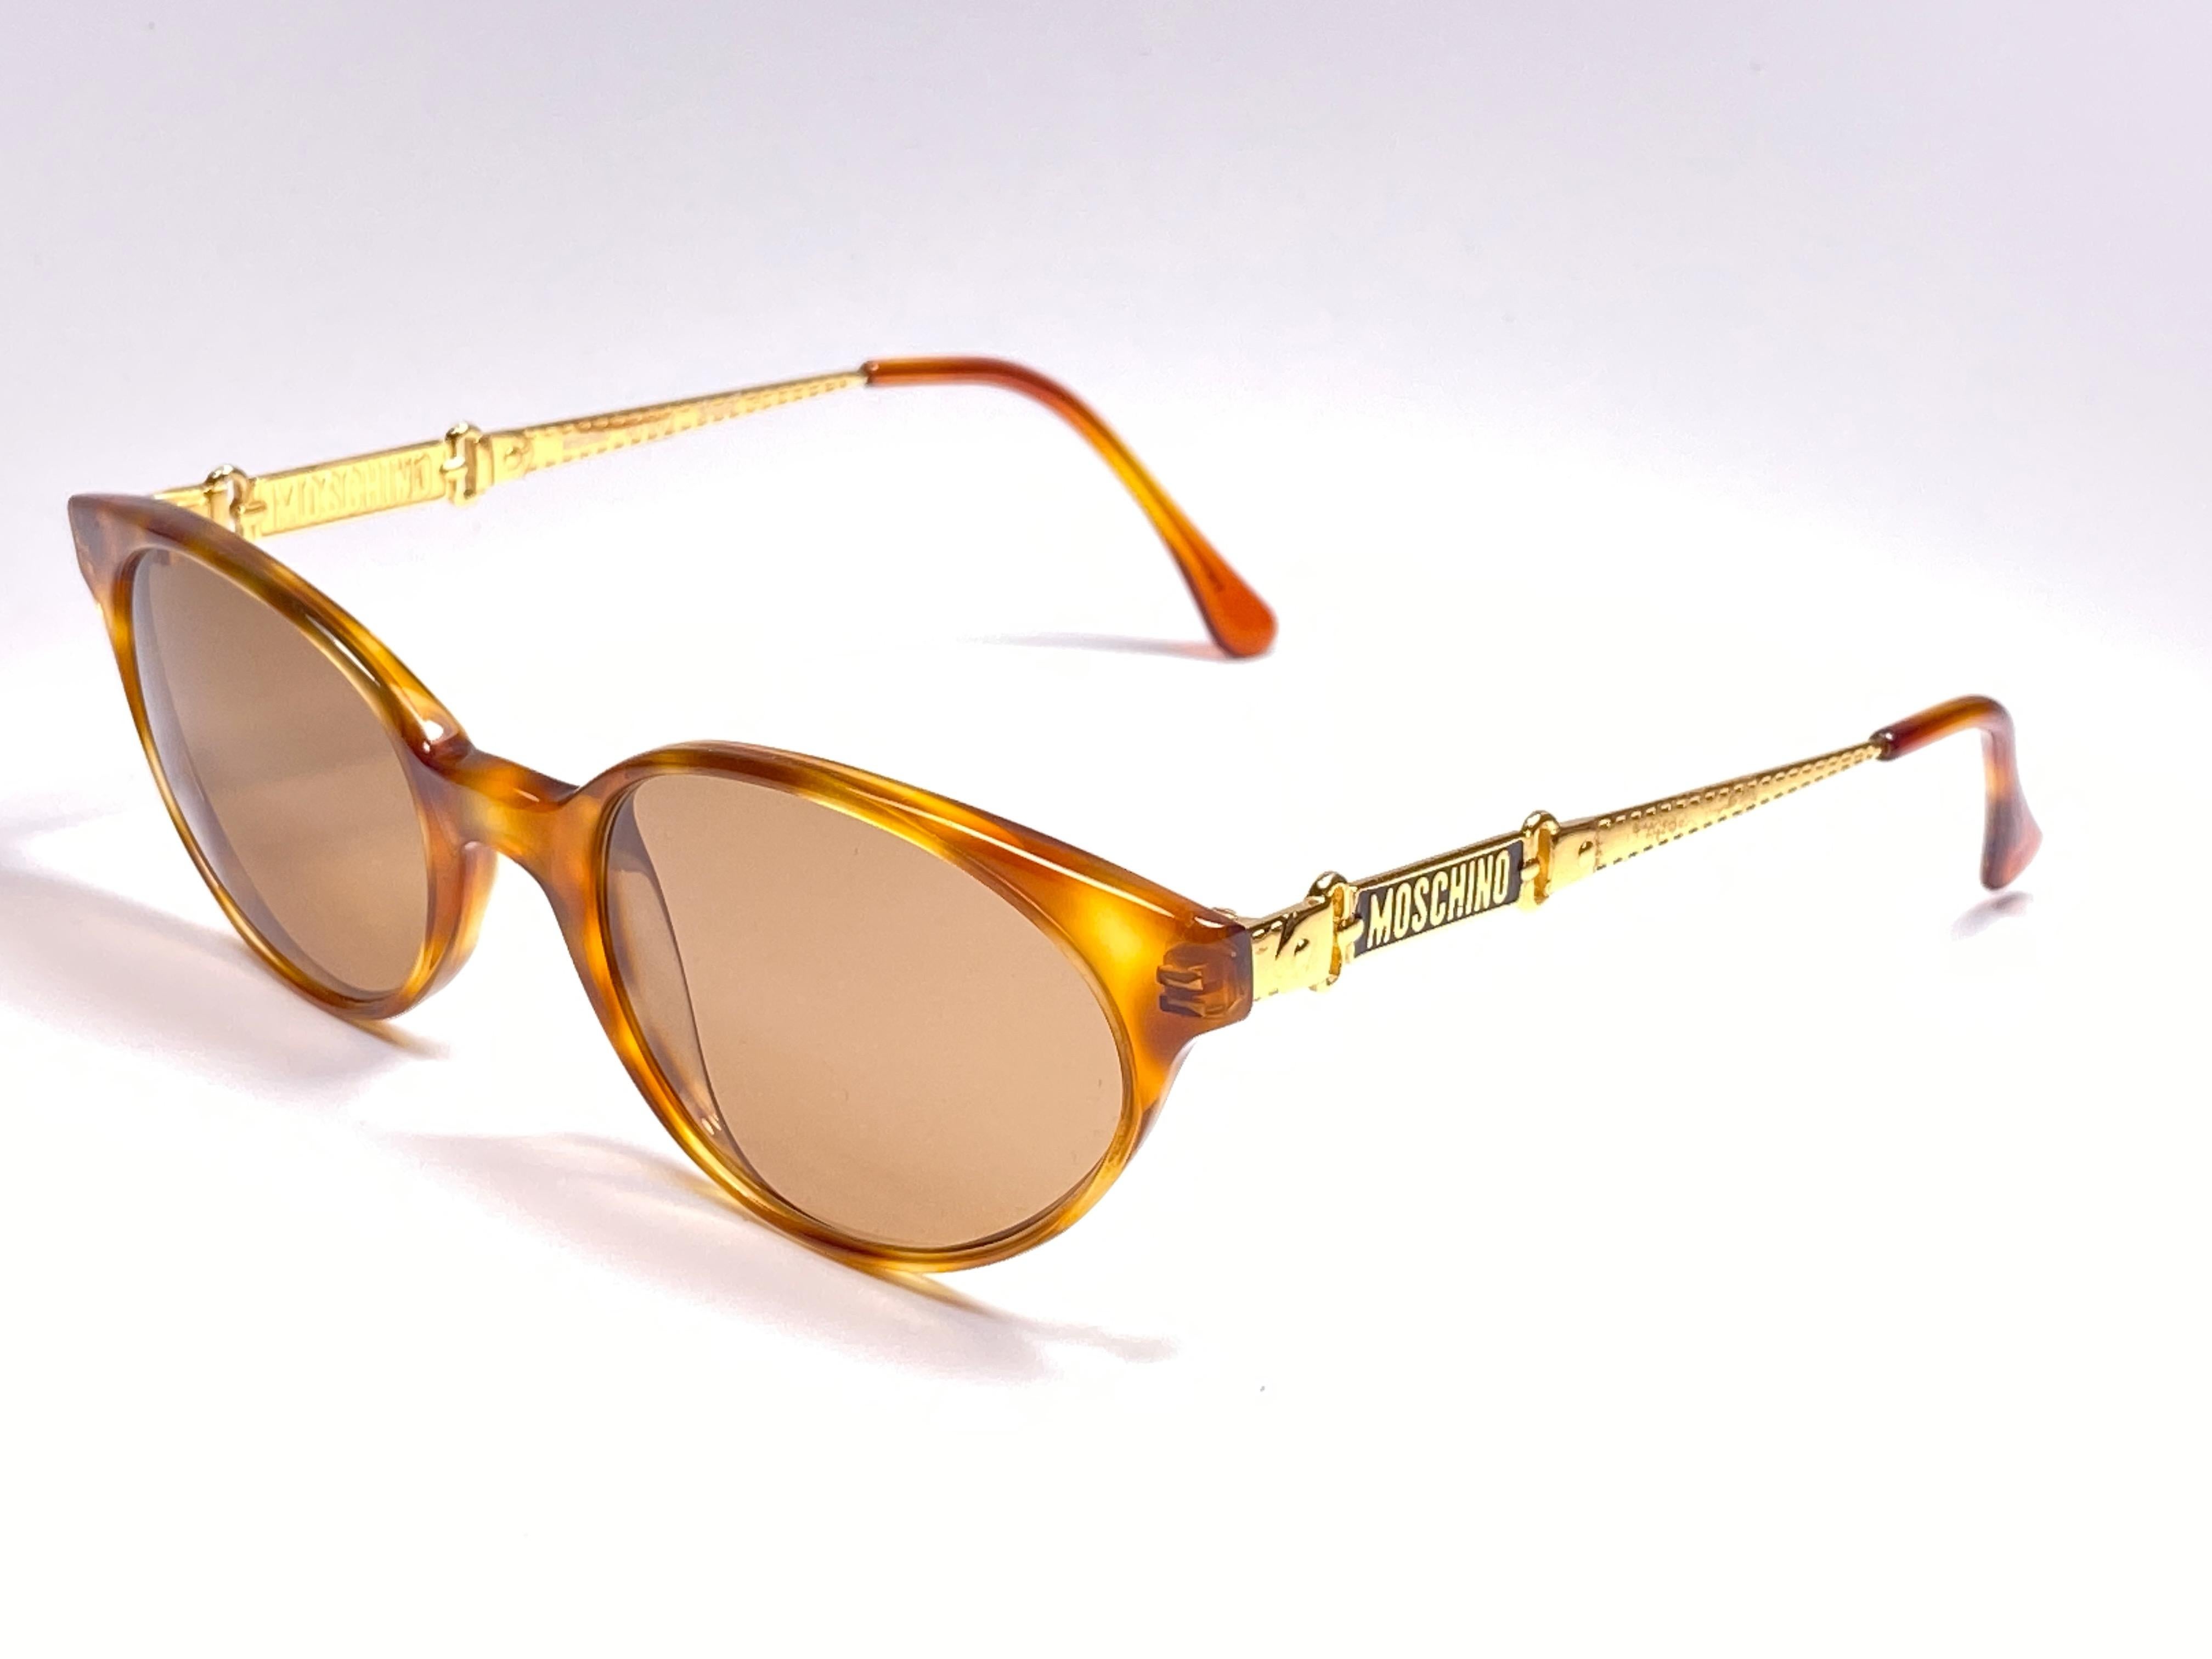 New Vintage Moschino tortoise Cat Eye medium size gold frame

Spotless medium brown lenses.

Made in Italy.
 
Produced and design in 1990's.

This item may show minor sign of wear due to storage.

Front : 14 cms 
Lens Width : 5 cms
Lens Height : 3.2